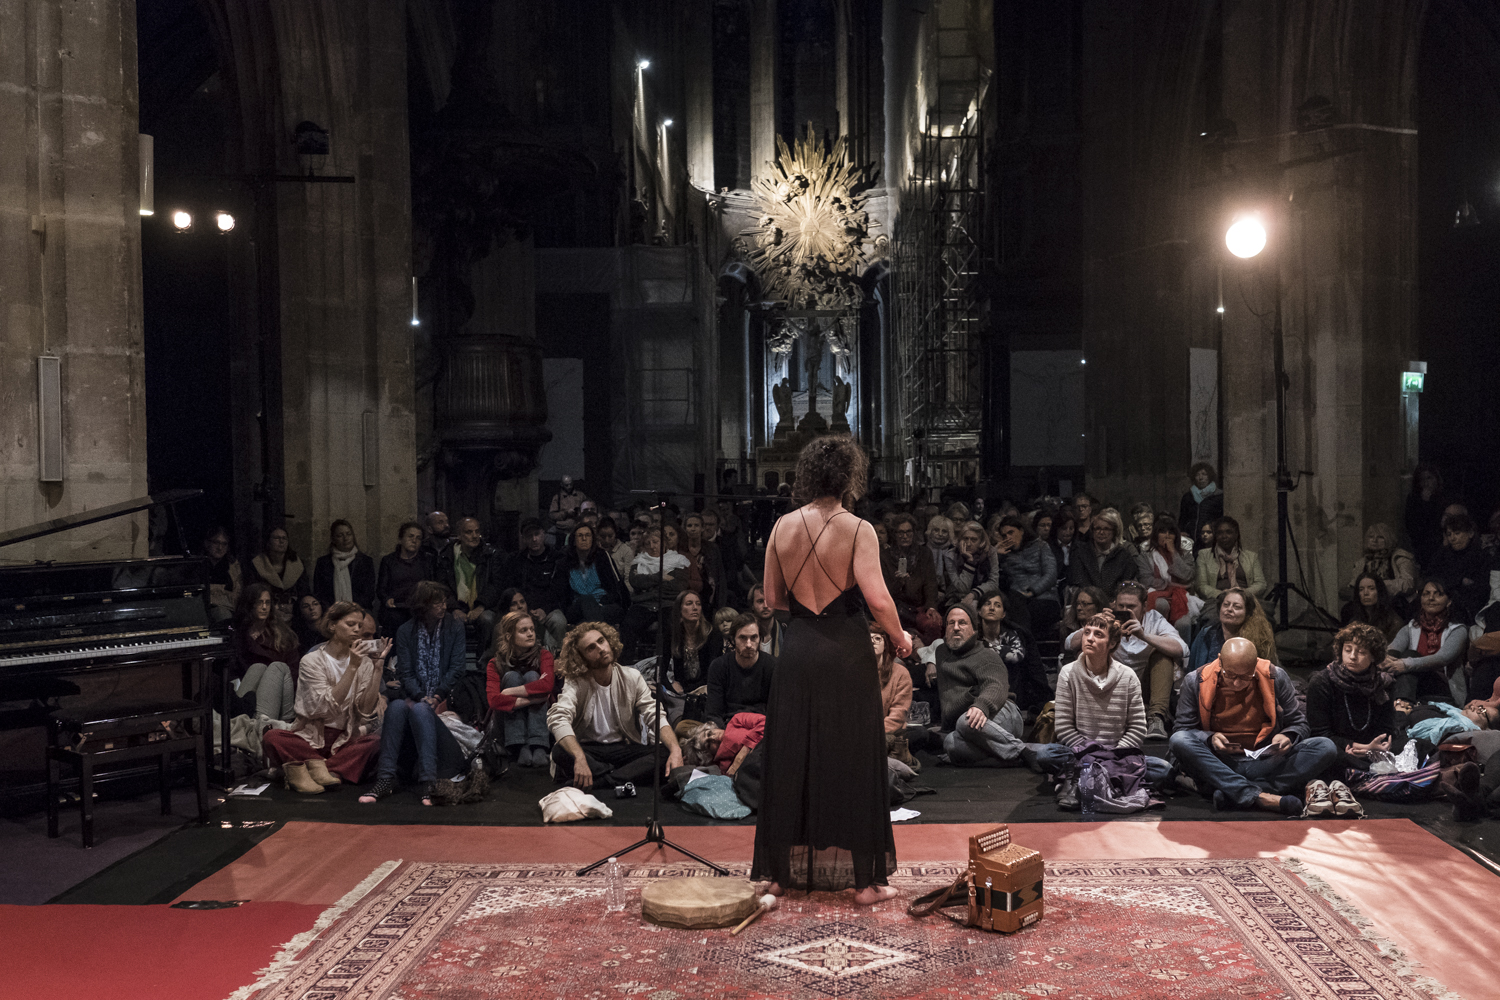 Fanny Perrier-Rochas performs Byzantine and Syriac songs on 8 June 2019 (photo: Jan Schmidt-Whitley / Le Pictorium)